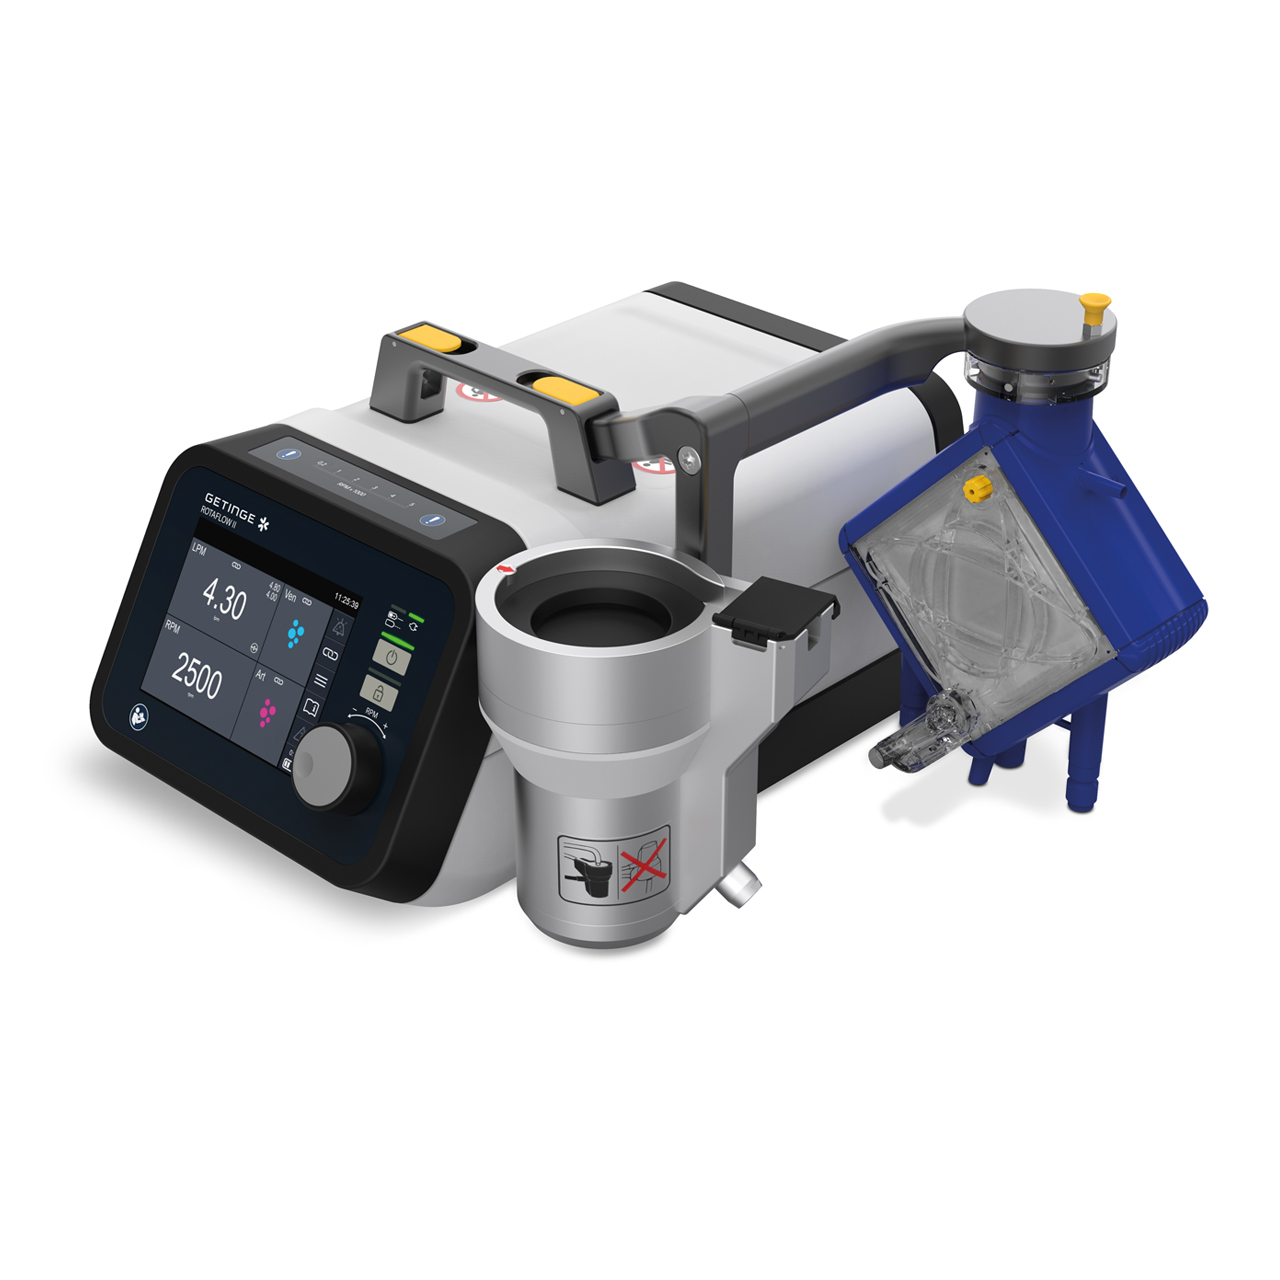 Extracorporeal life support (ECLS) with the reliable, high quality Rotaflow II 